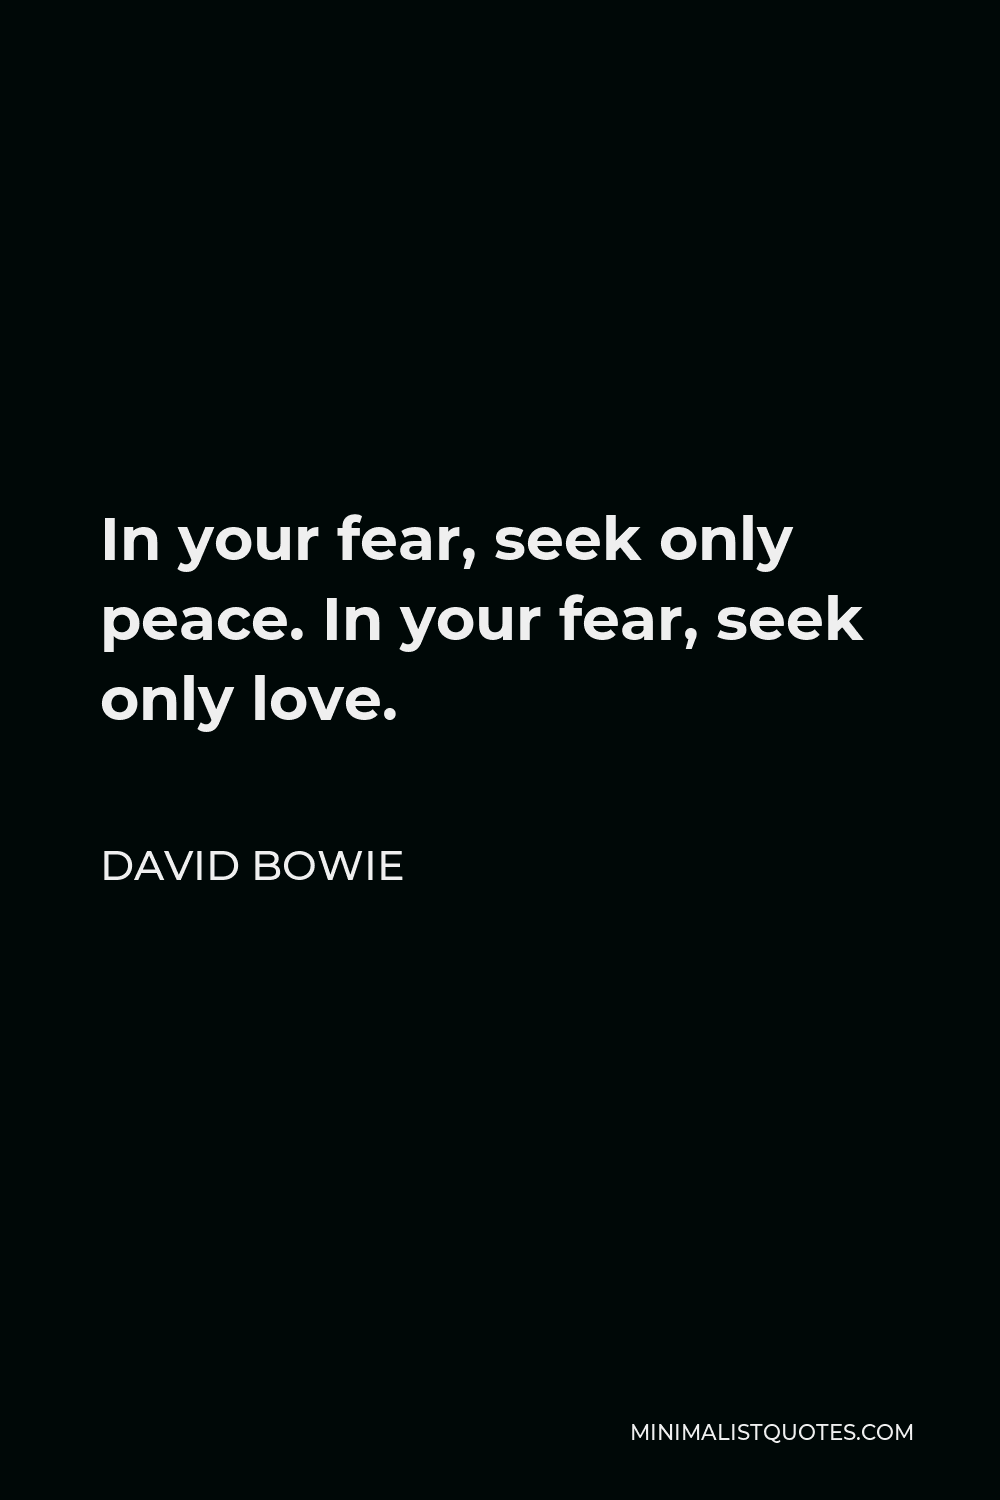 David Bowie Quote - In your fear, seek only peace. In your fear, seek only love.